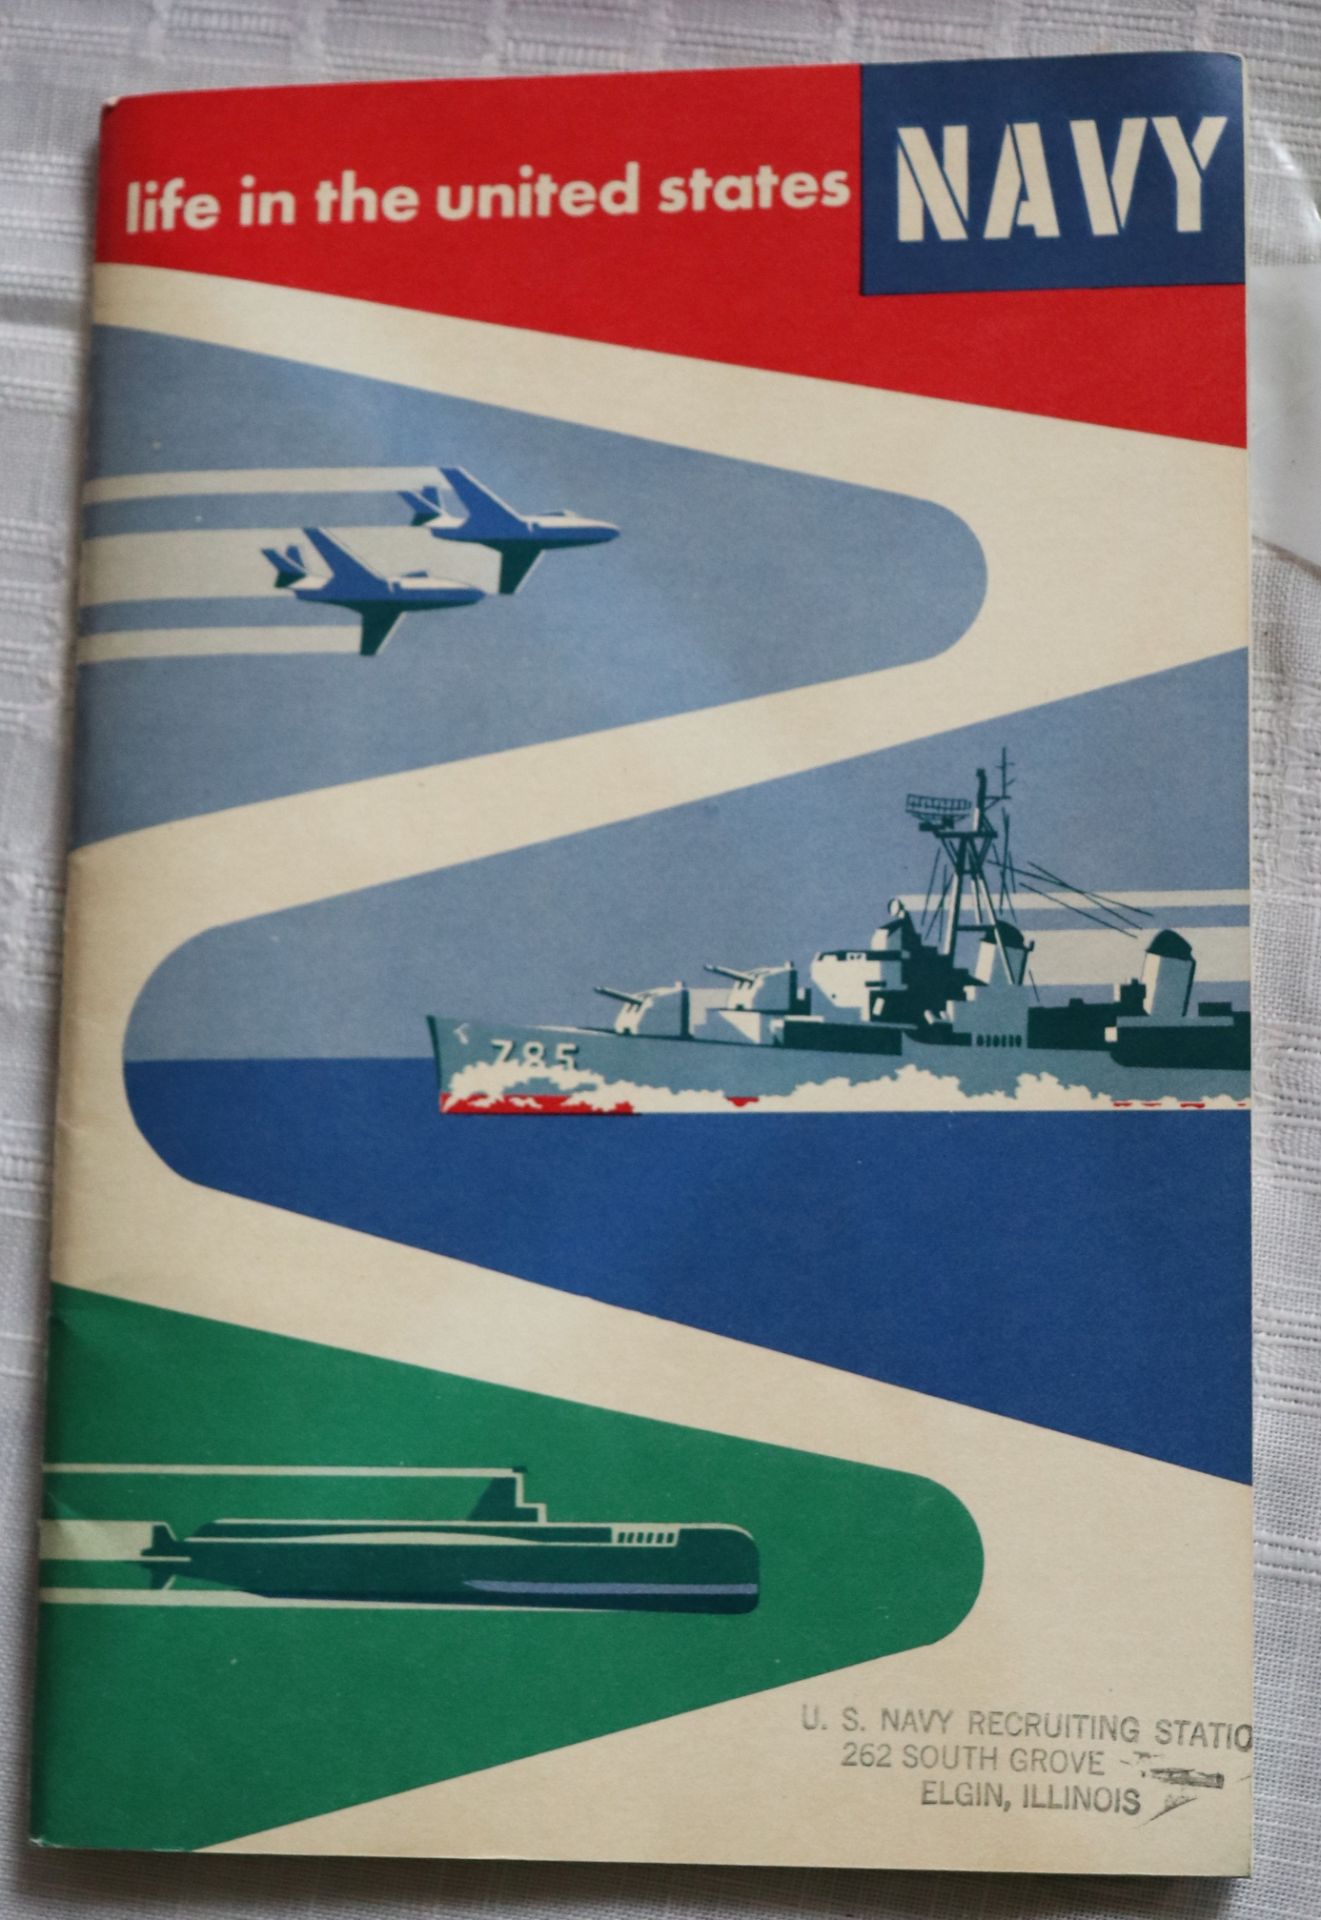 Life in the United States Navy brochure